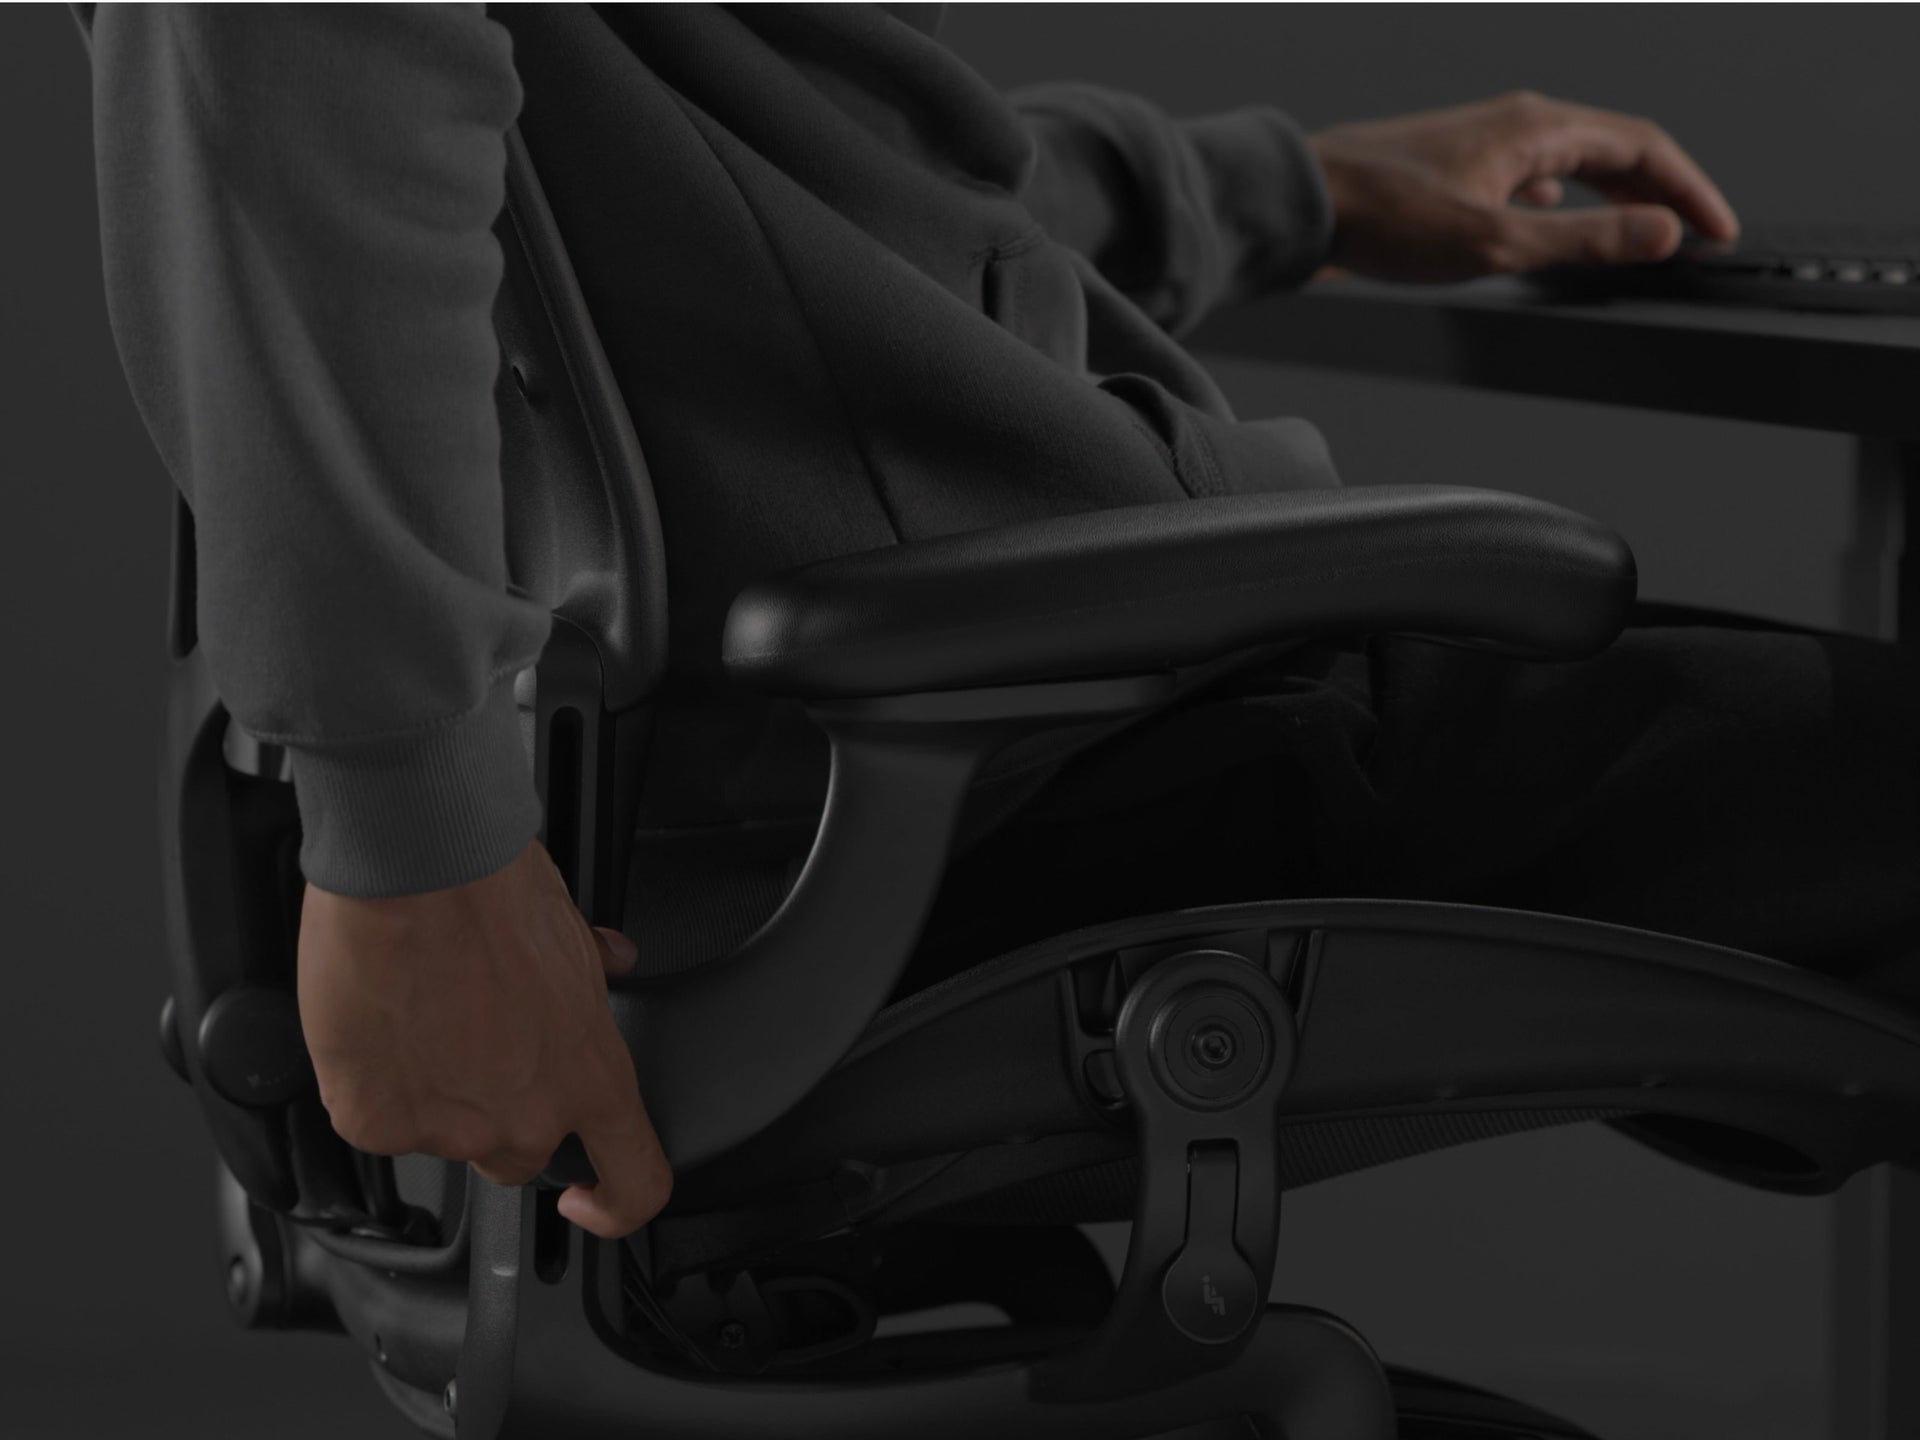 A close-up video of a person’s hand adjusting the BackFit on a black Embody Gaming Chair.